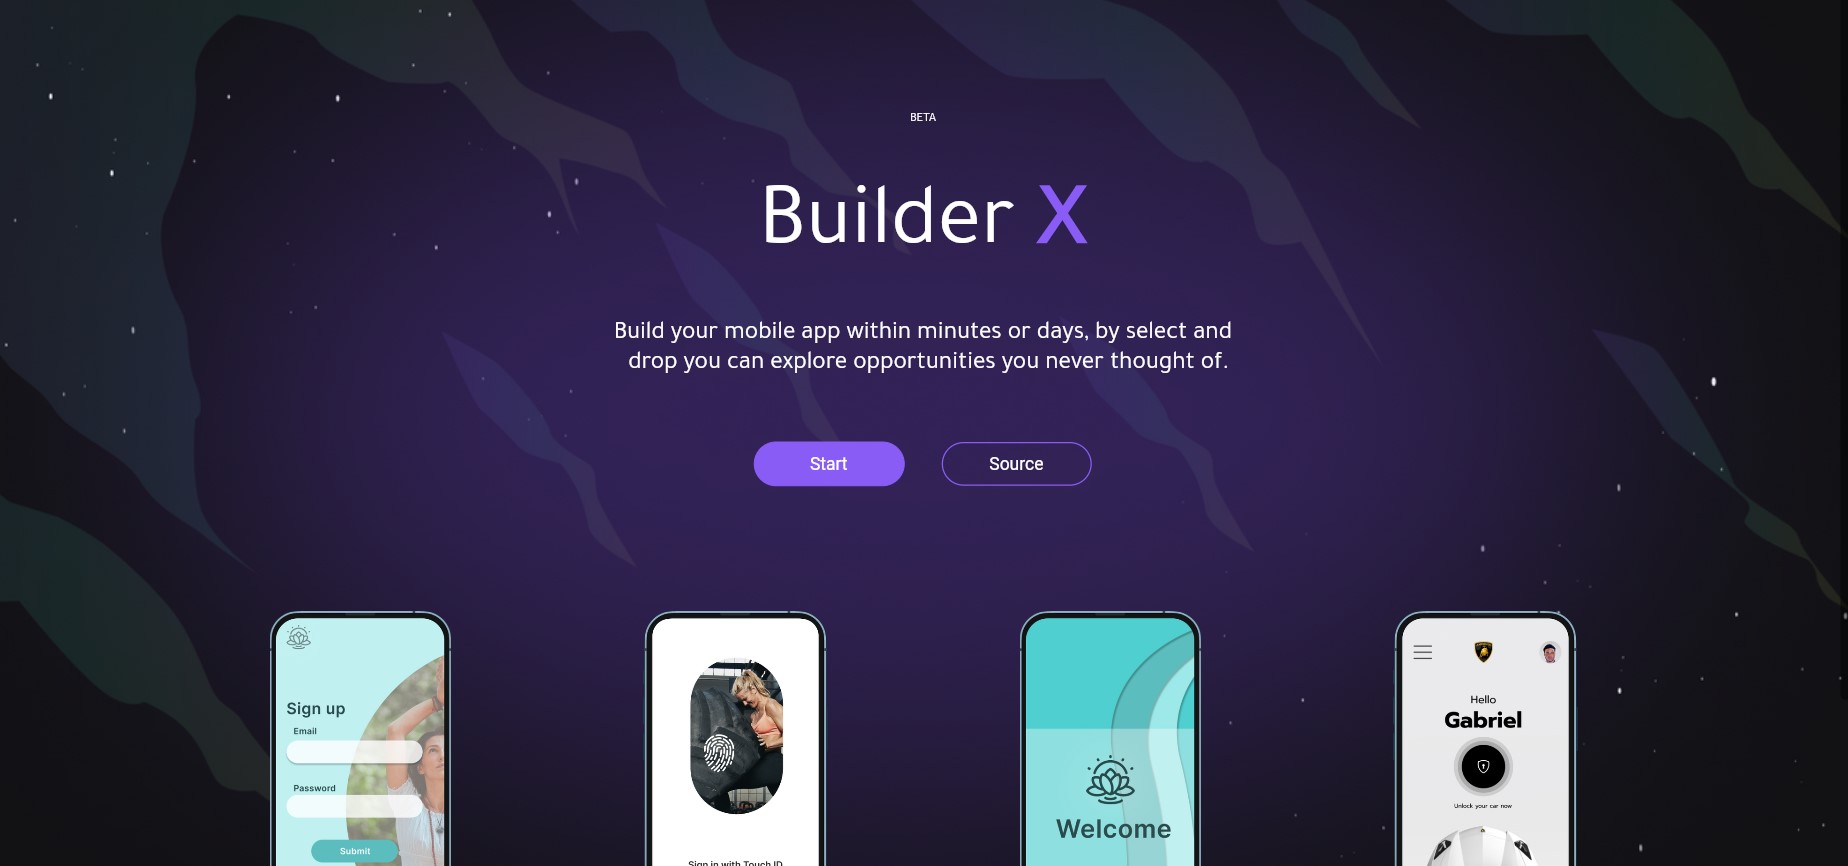 Builder

Build your mobile app within minutes or days, by select and
drop you can explore opportunities you never thought of

Sign up

Welcome